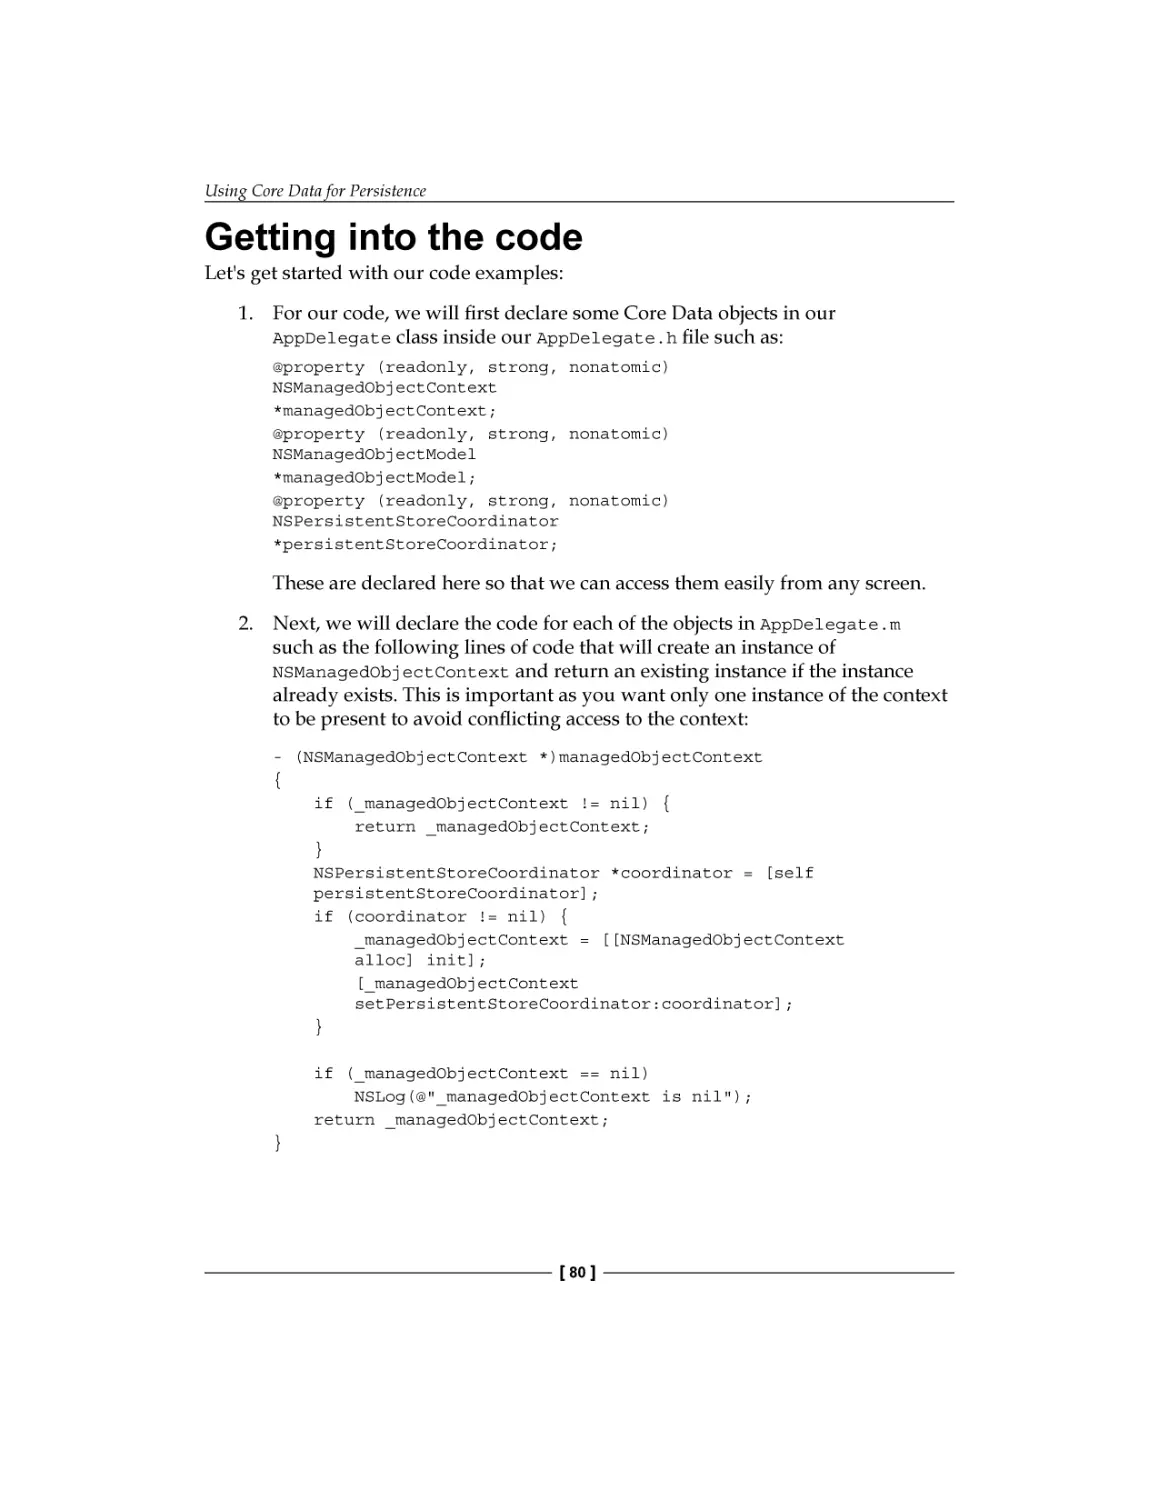 Getting into the code